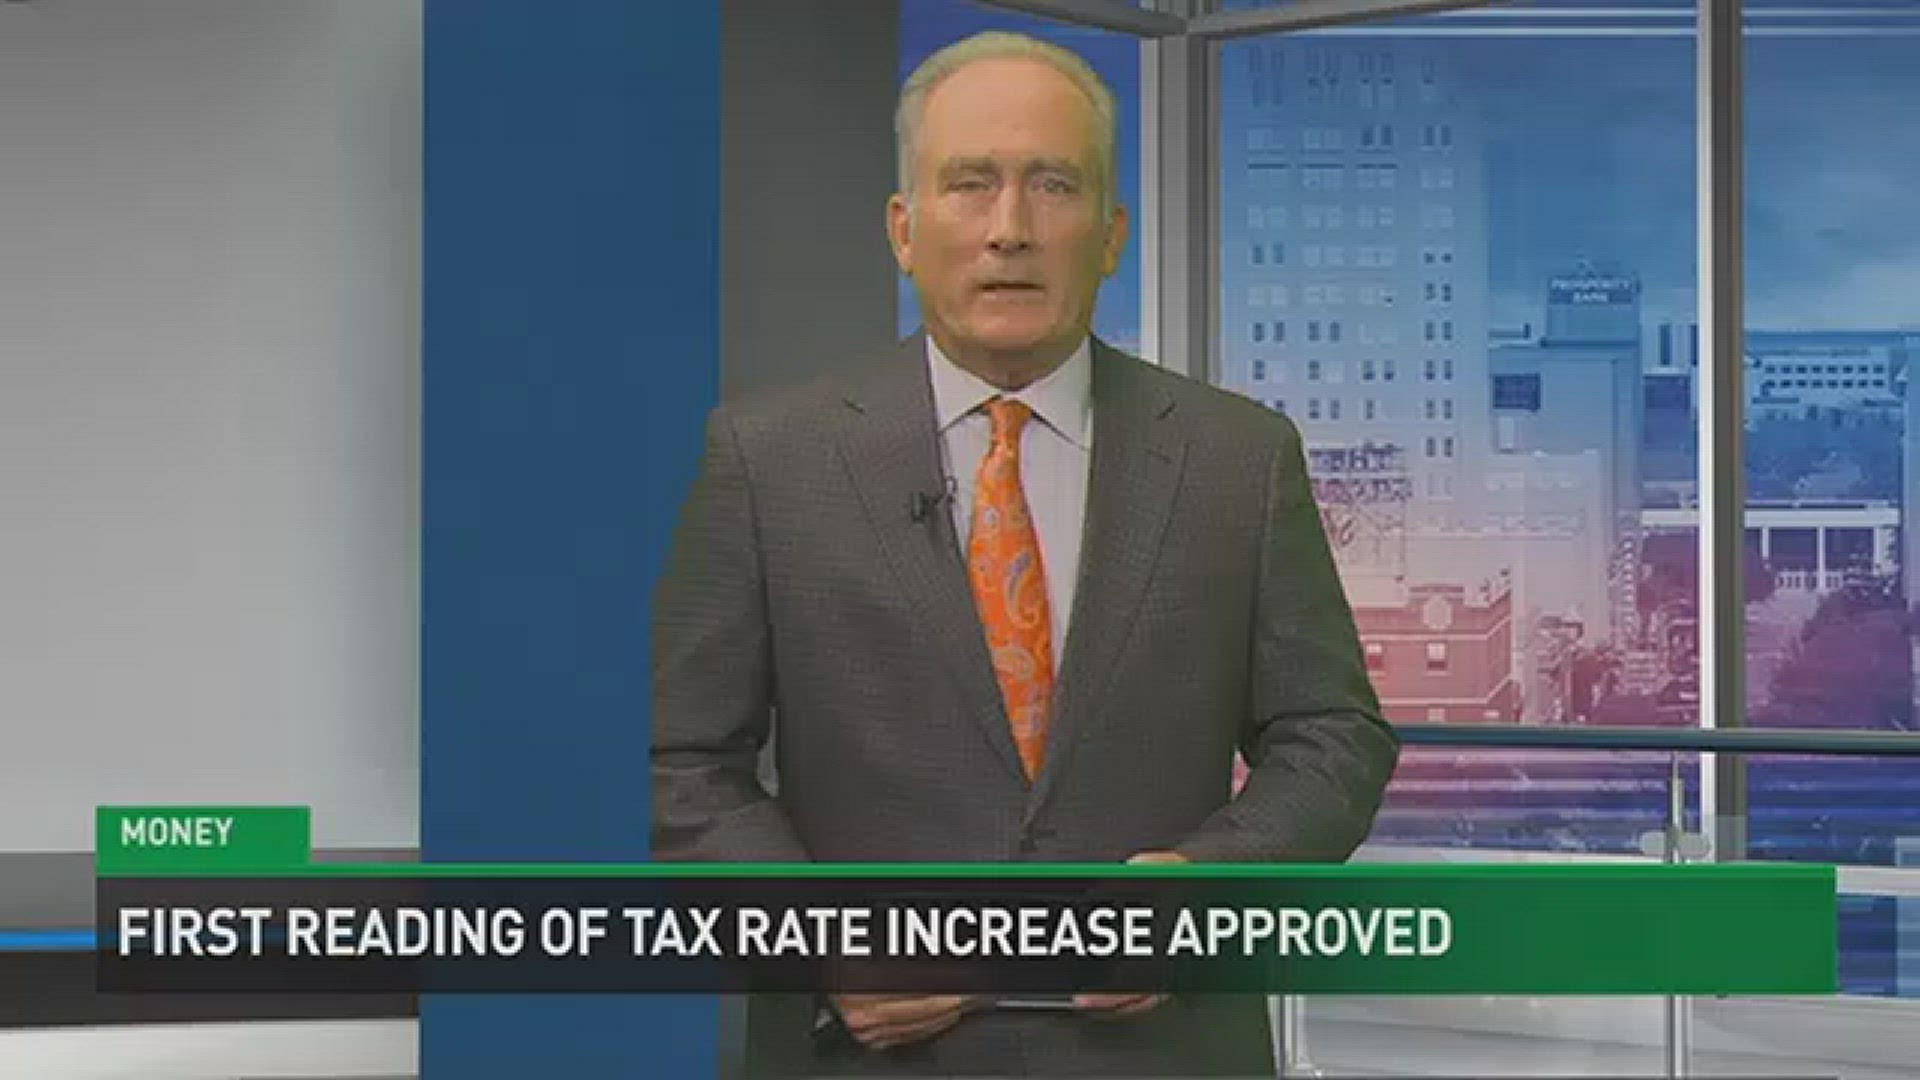 First Reading of Tax Rate Increase Approved